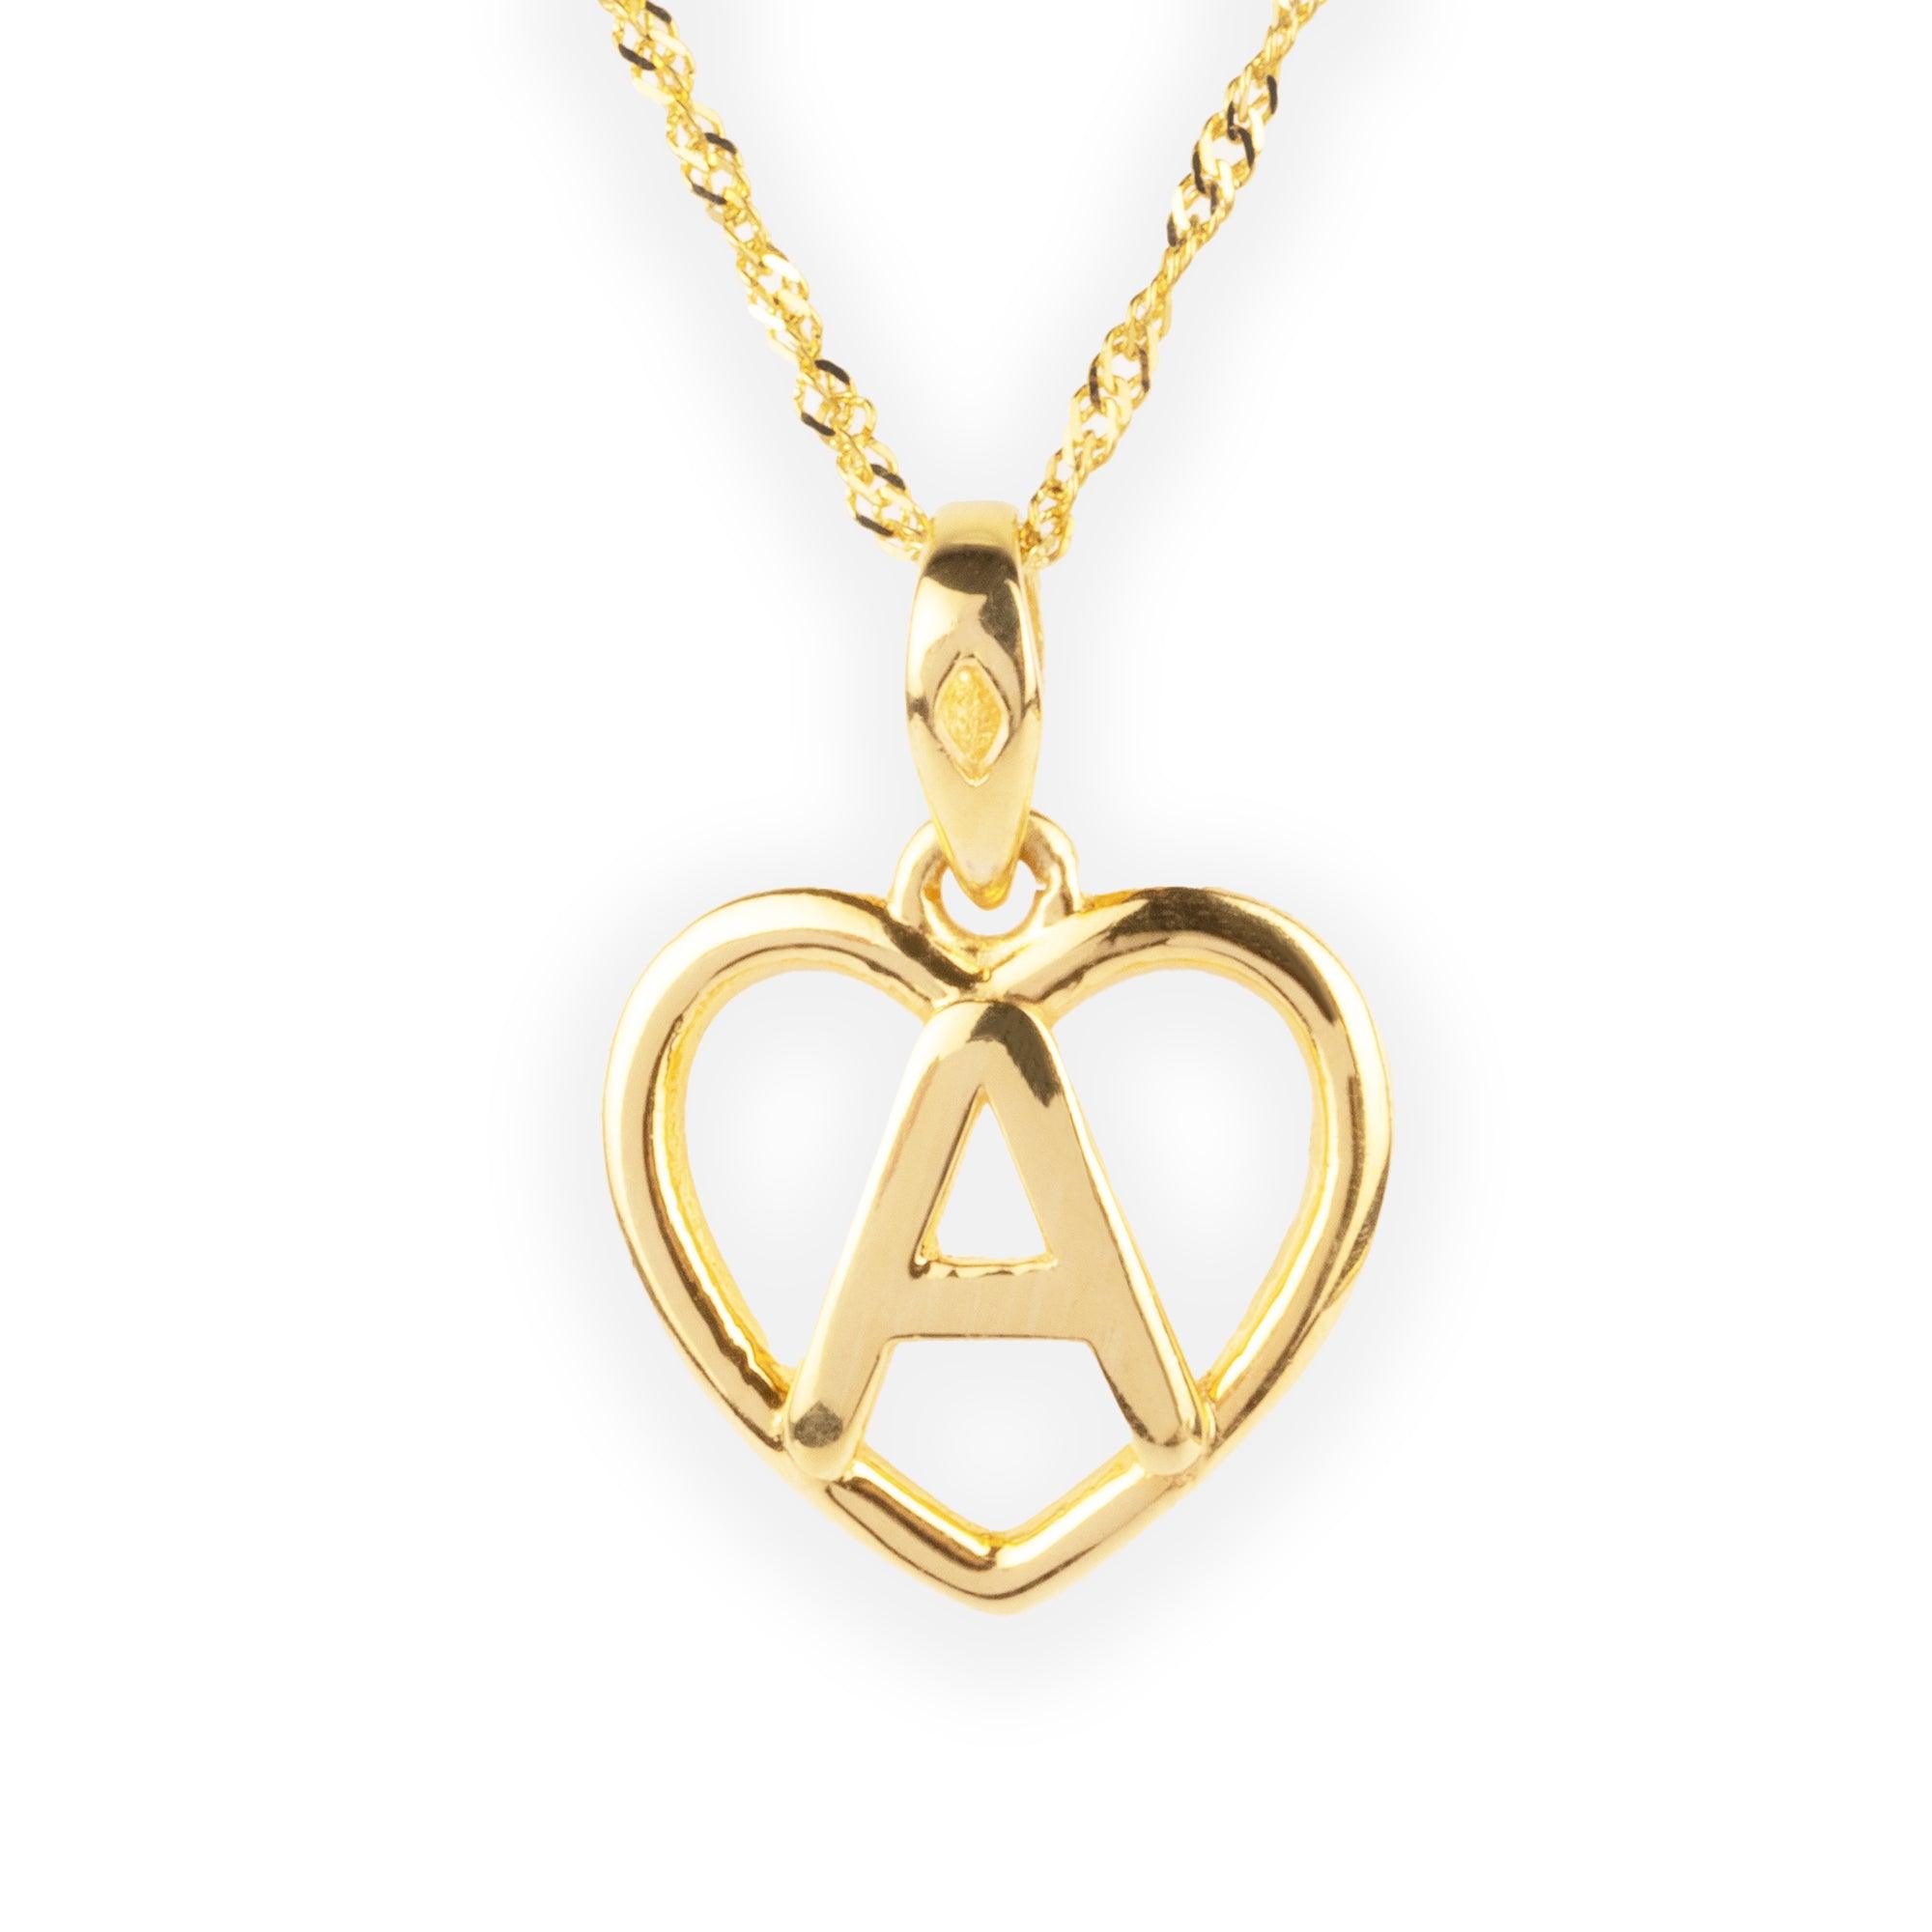 'A' 22ct Gold Heart Shape Initial Pendant P-7033 - Minar Jewellers